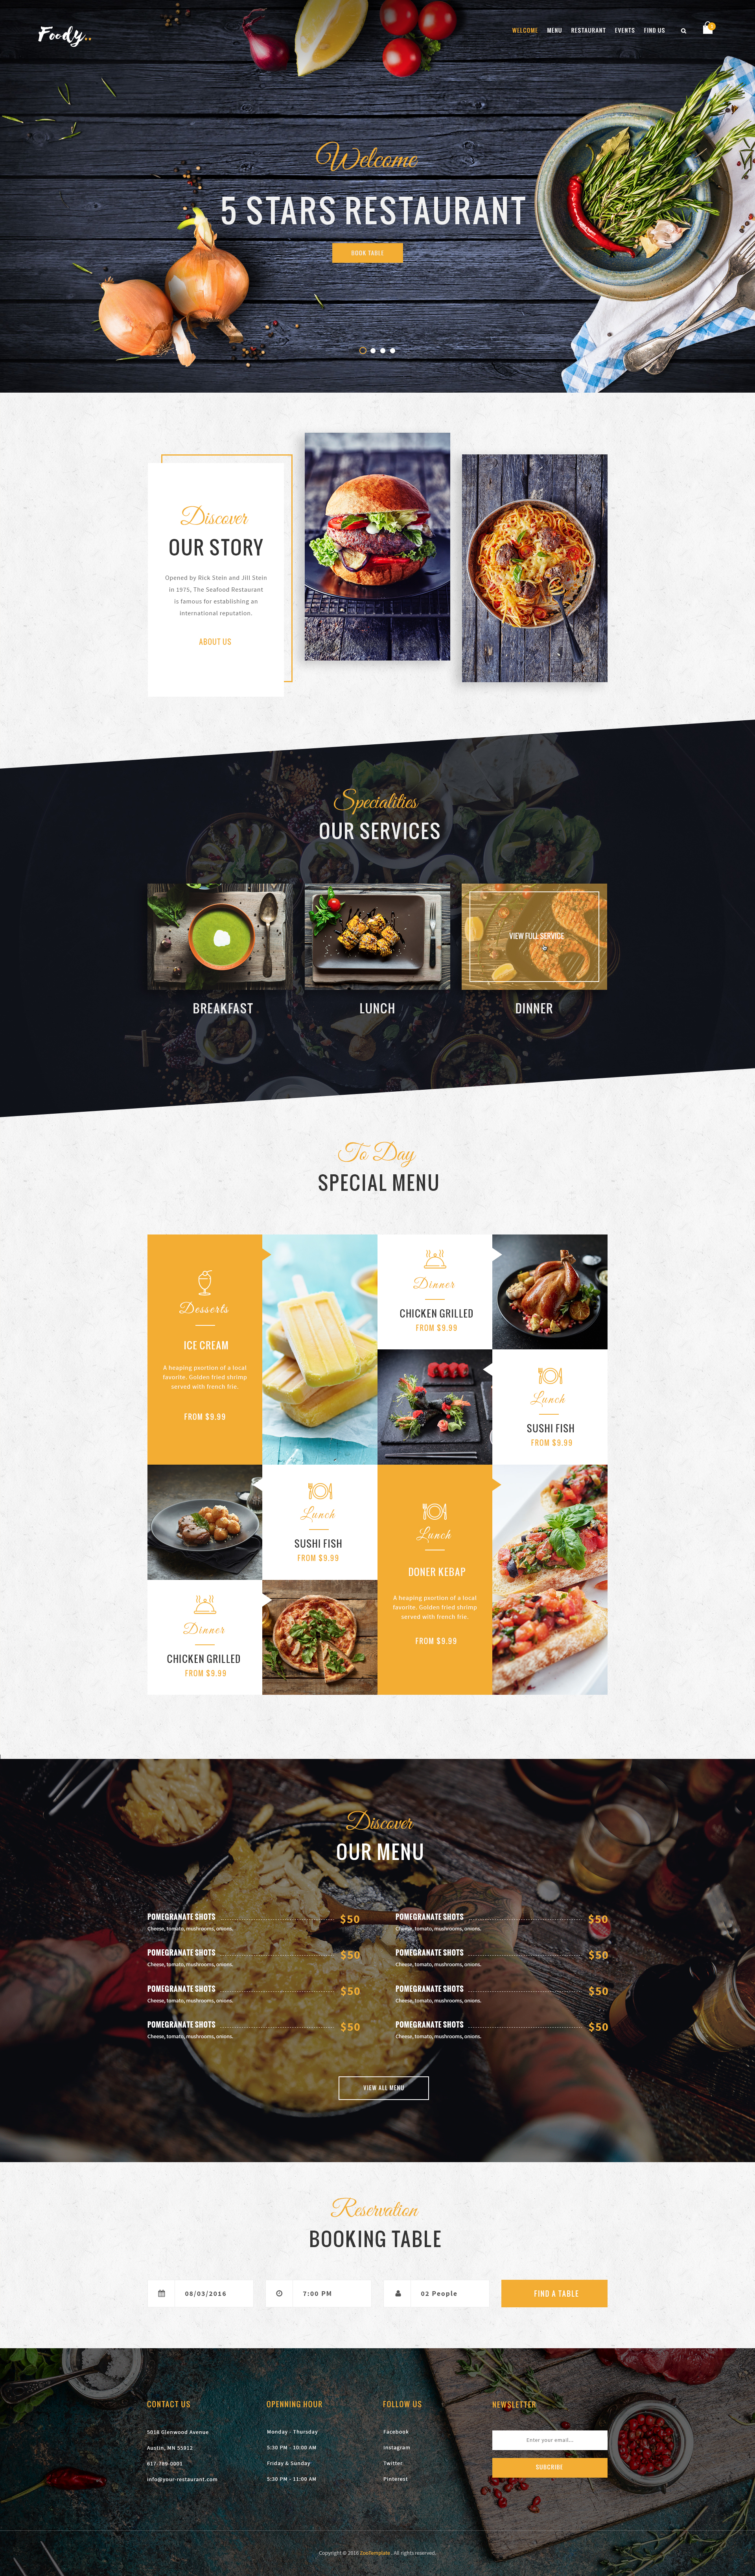 Download Foody Luxury Restaurant Psd Template By Cleveraddon Themeforest PSD Mockup Templates